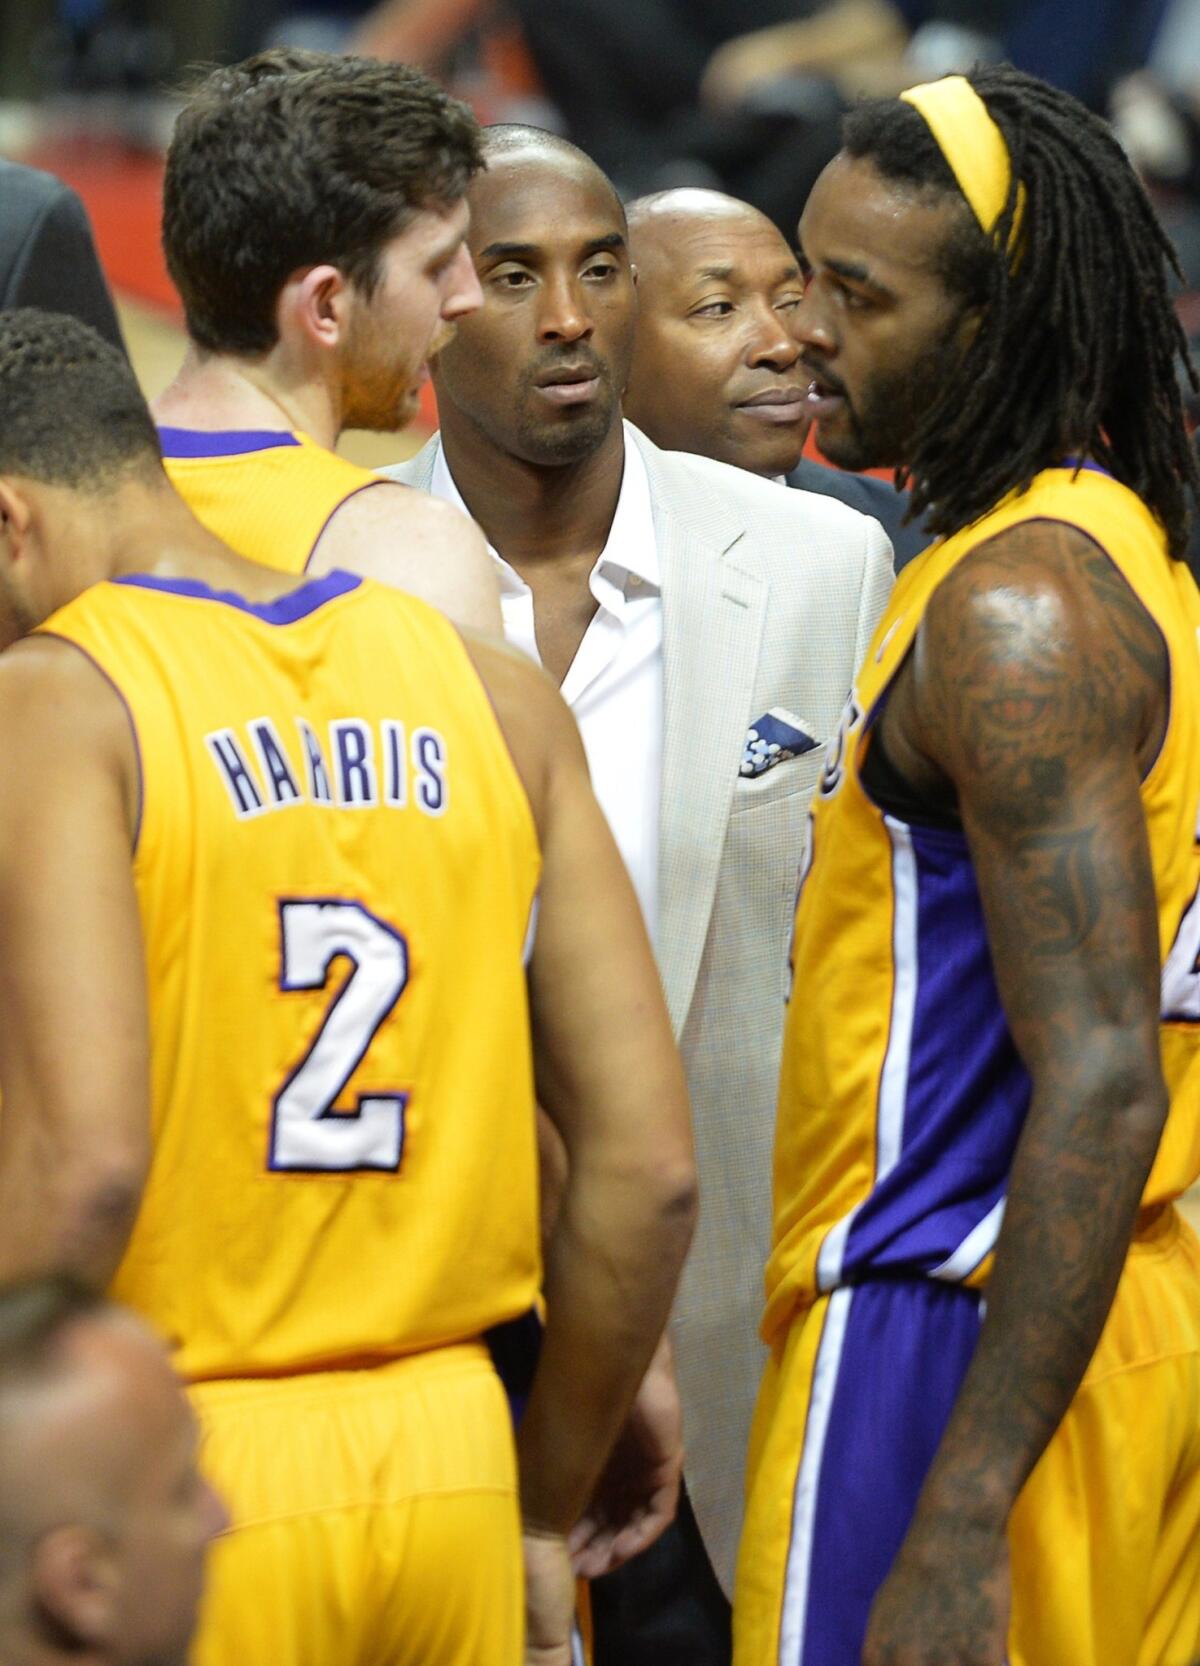 Lakers star Kobe Bryant, center, listens to teammates Ryan Kelly, left, and Jordan Hill during the Lakers' preseason loss to the Golden State Warriors in Beijing on Friday.